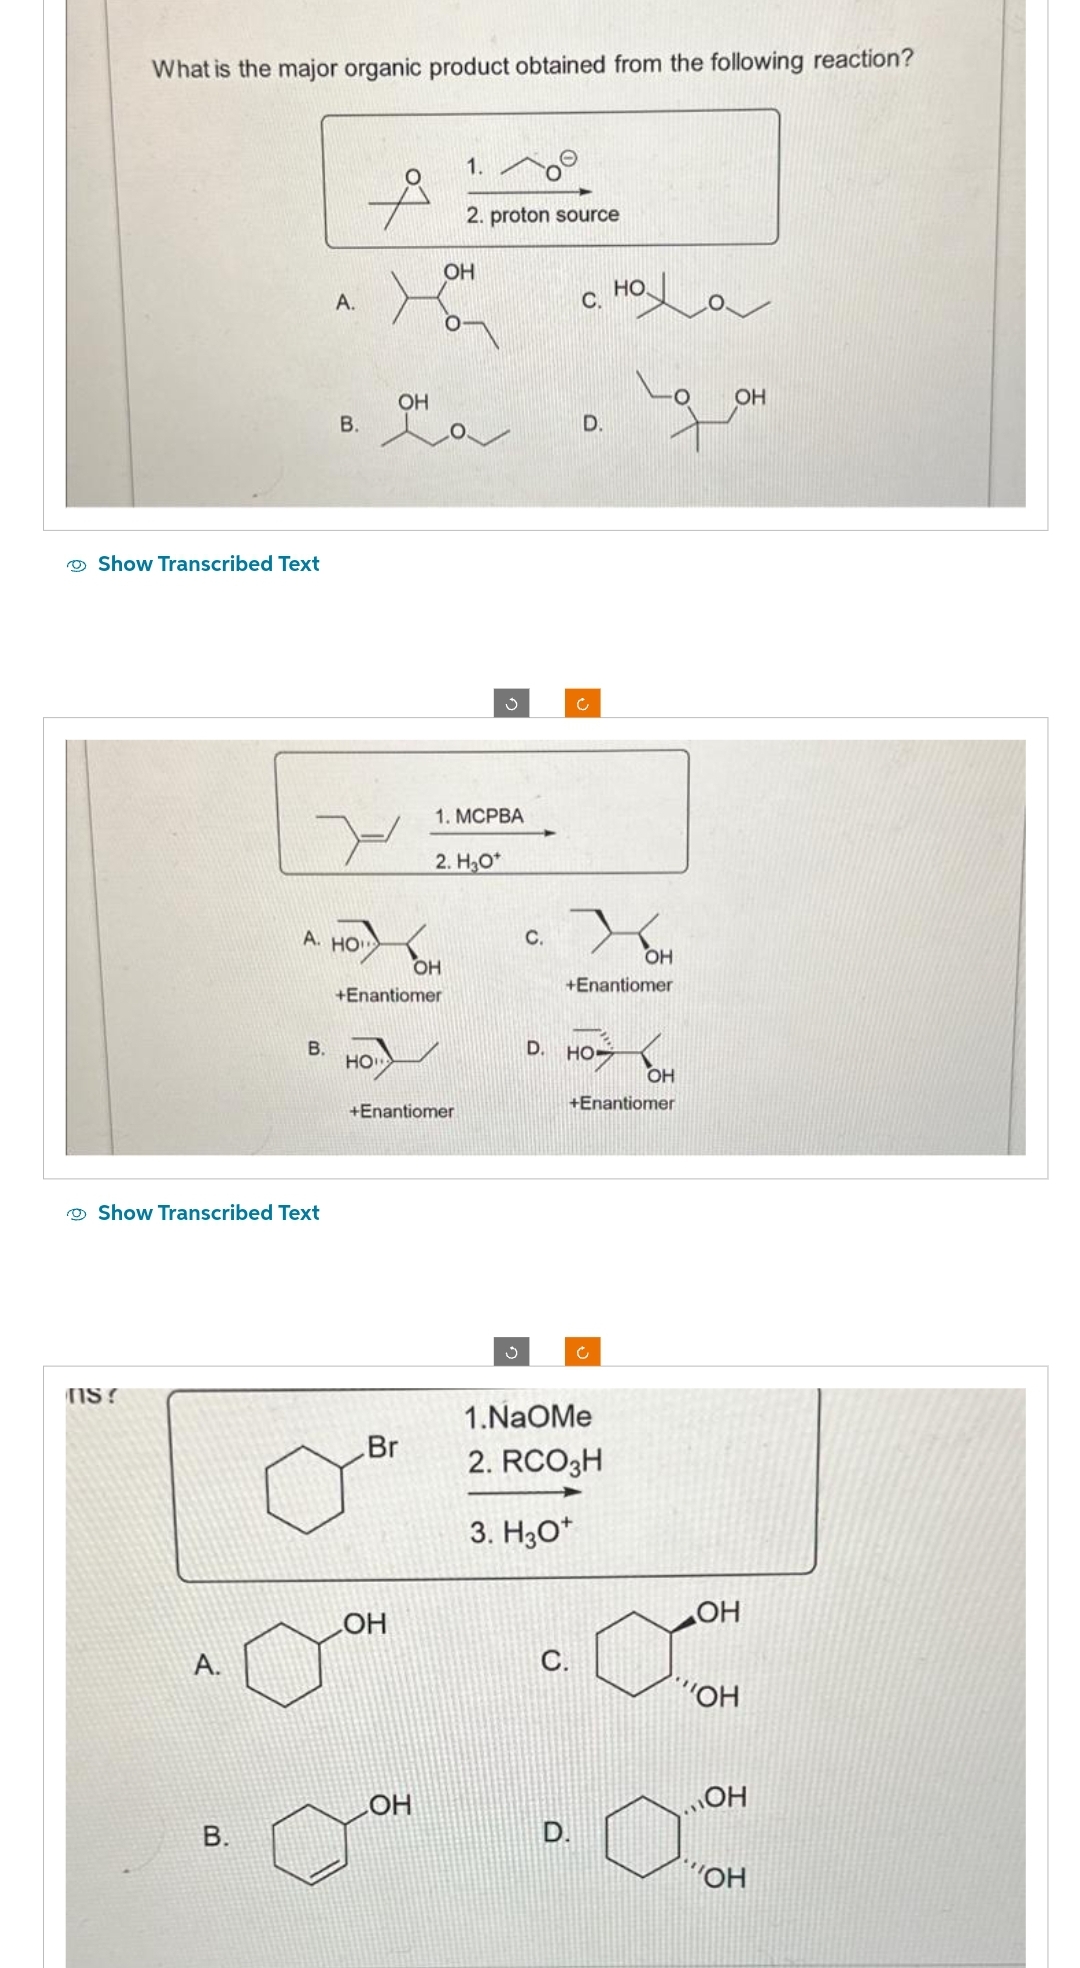 What is the major organic product obtained from the following reaction?
Show Transcribed Text
NS?
Show Transcribed Text
A.
B.
B.
А.
A. HO"
B.
HO
ОН
+Enantiomer
Br
ОН
OH
+Enantiomer
ОН
1.
ОН
2. proton source
1. MCPBA
2. Но
5
S
с.
с
с.
с.
D. но-
о
D.
+Enantiomer
с
1.NaOMe
2. RCO3H
3. H30+
оха
OH
+Enantiomer
ОН
OH
ОН
КОН
„ОН
Пон